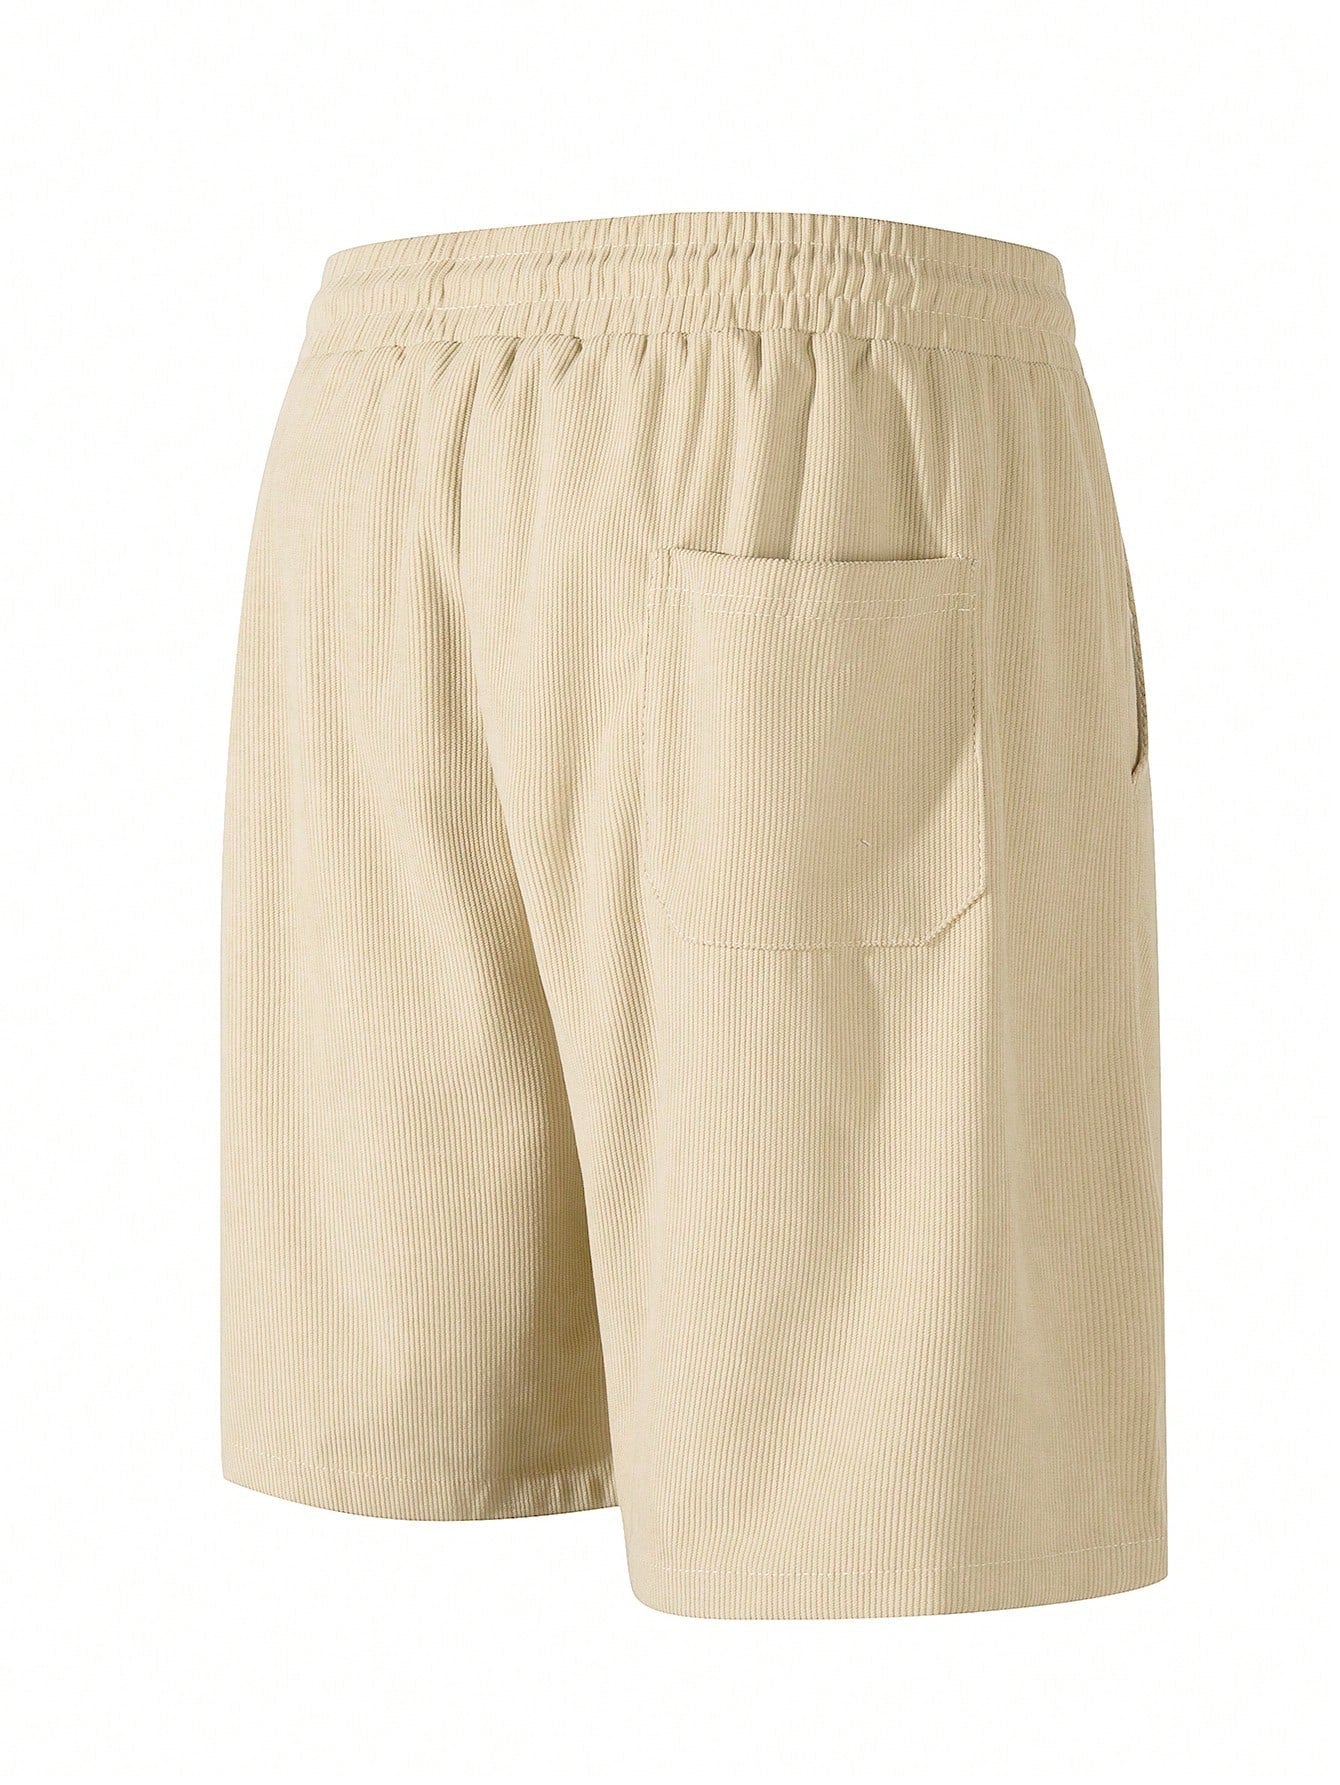 Men's Casual Drawstring Shorts with Pockets - Loose Fit, Solid Color, Summer Style